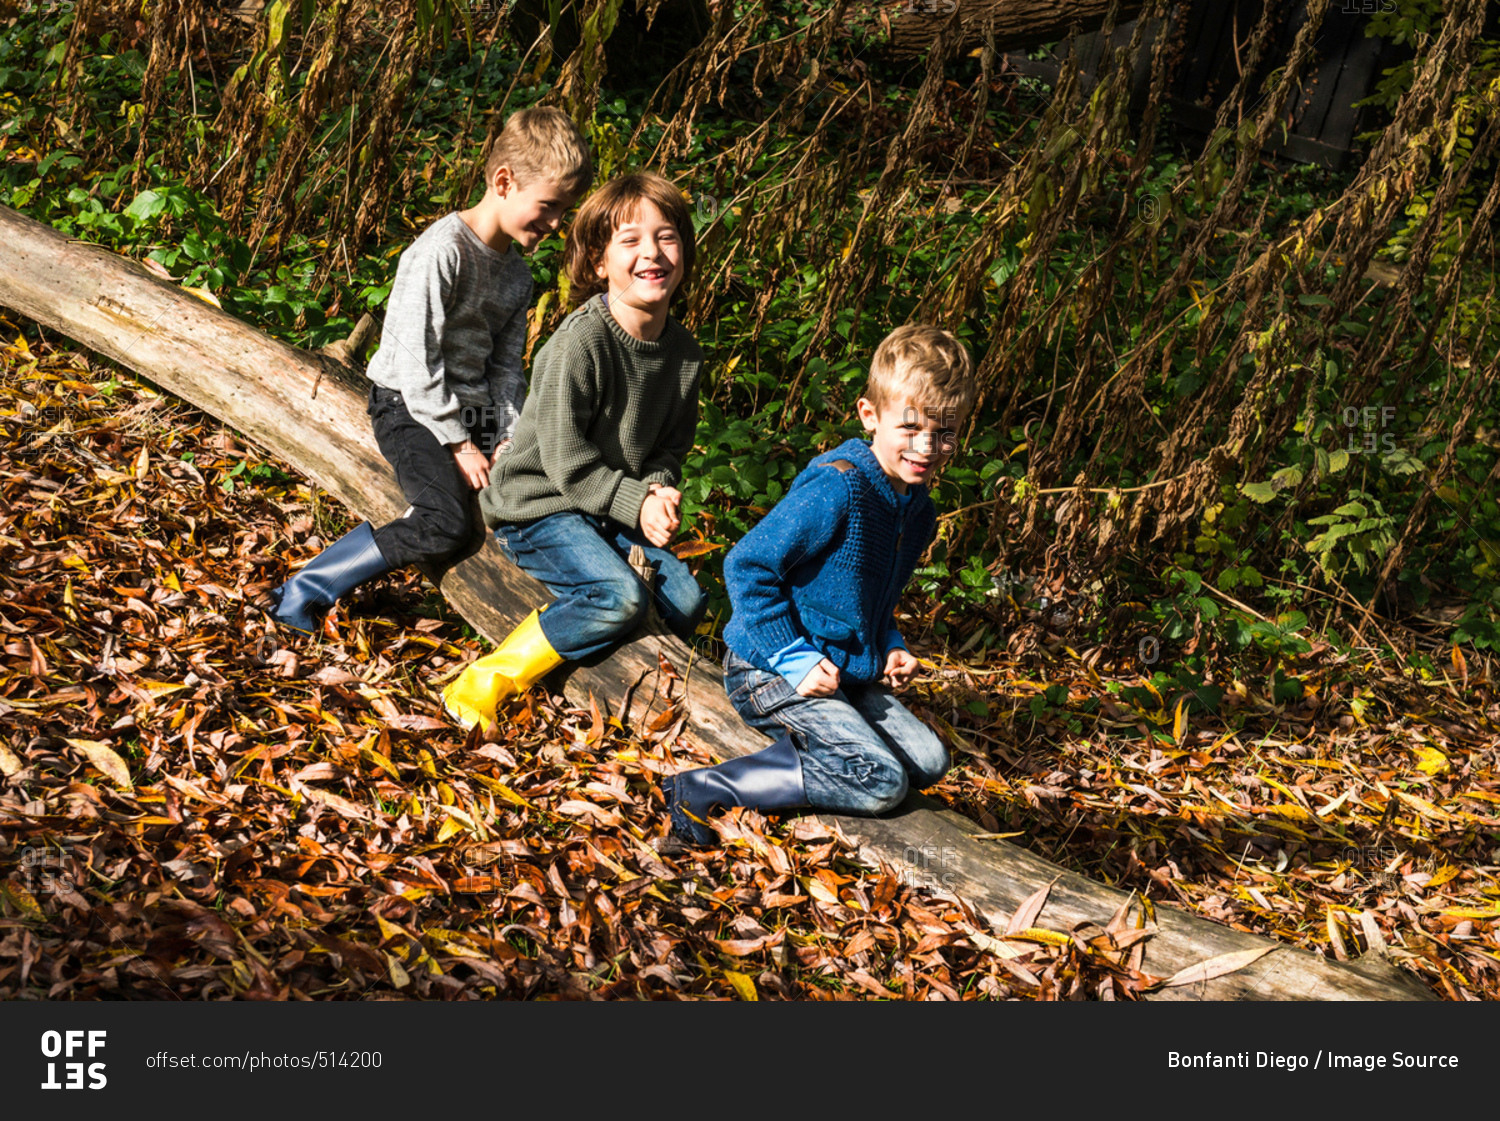 Three boys, outdoors, sitting on log, surrounded by autumn leaves